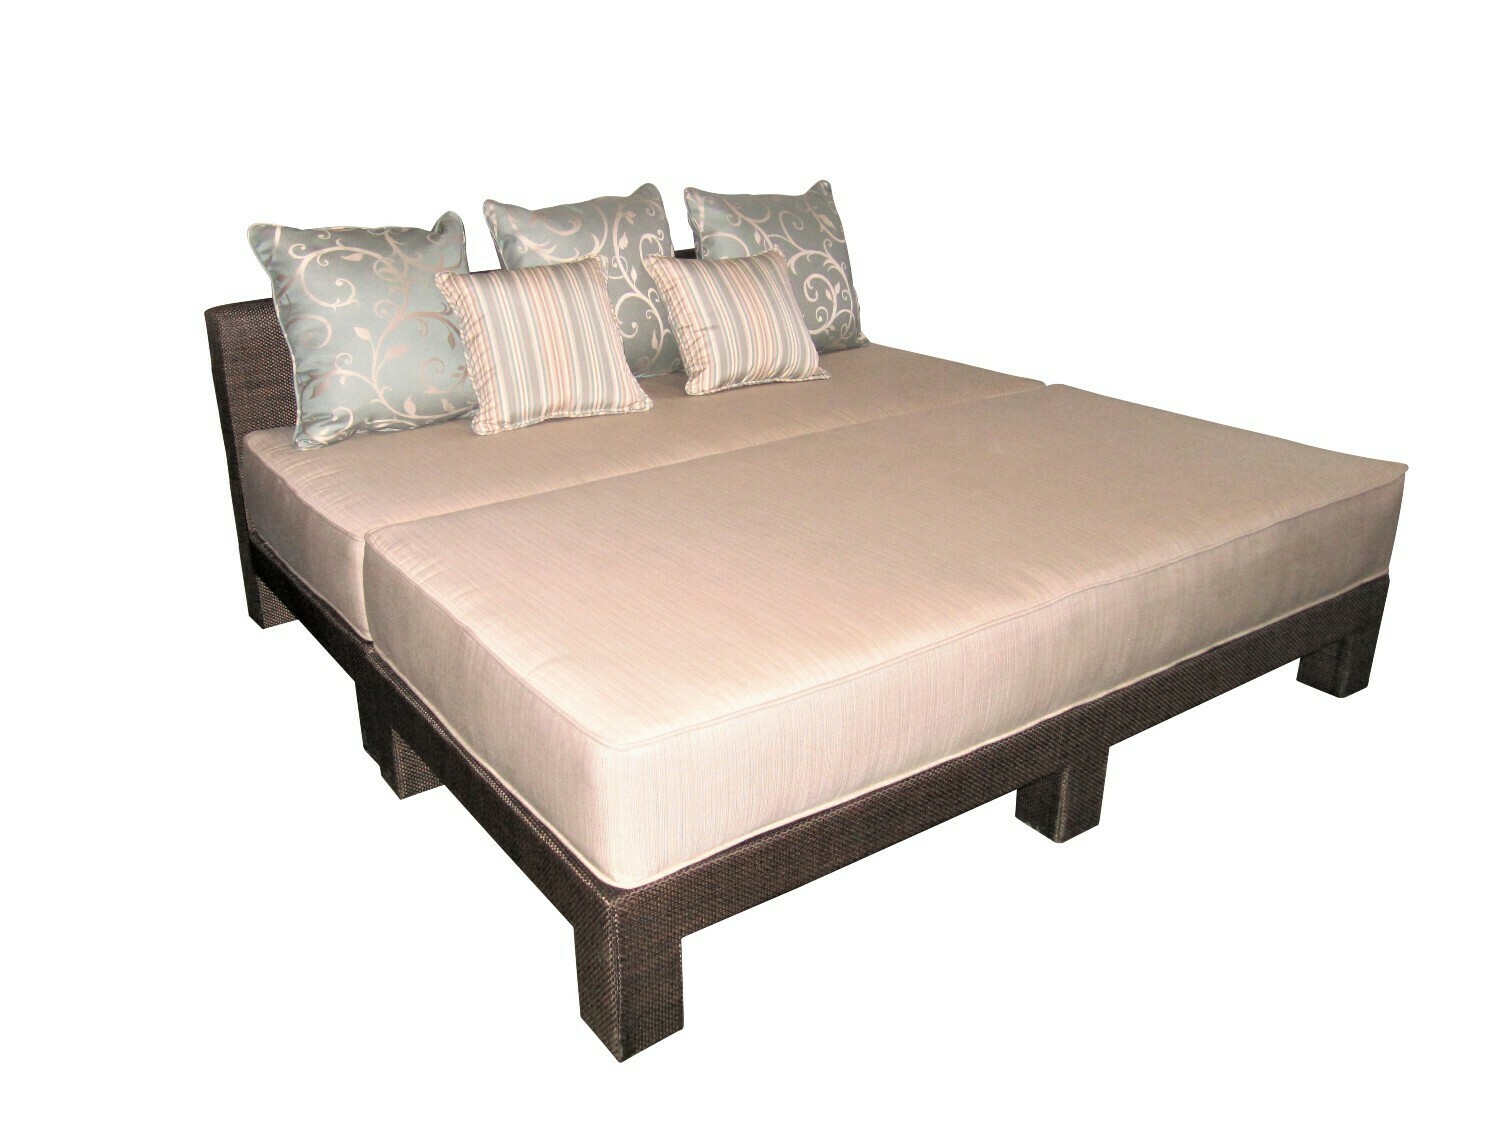 Daybed-2 pc. Base with Headboard